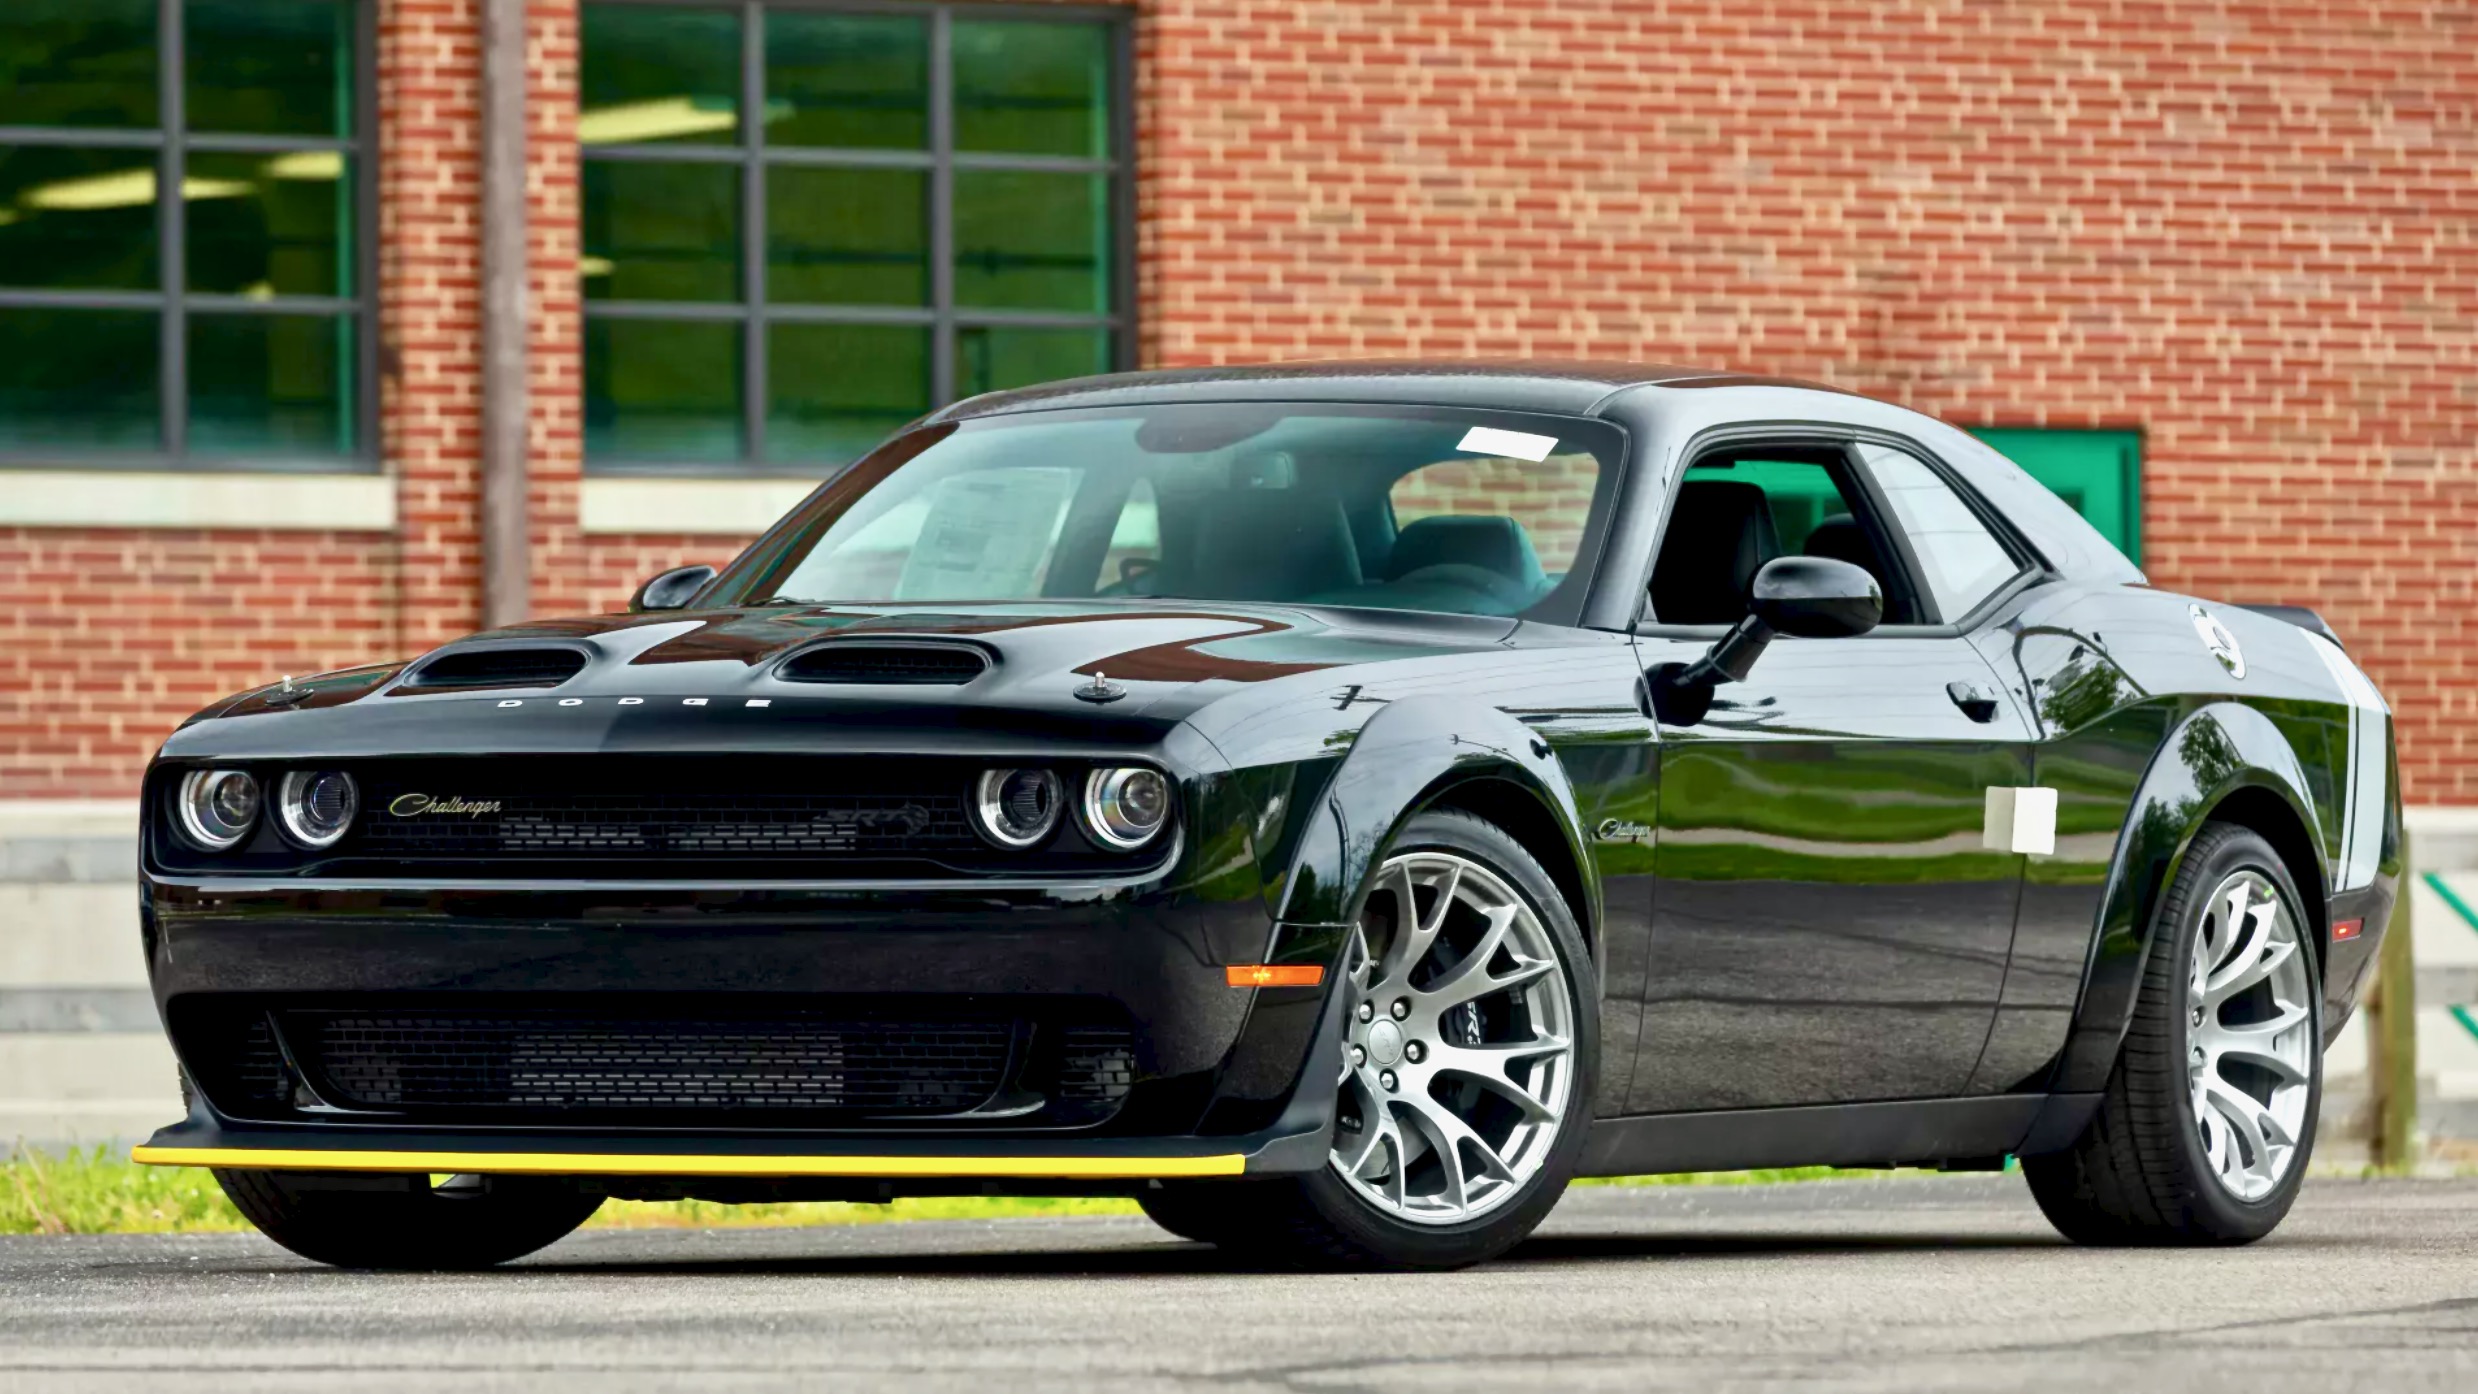 A Look at the Black Ghost Dodge Challenger and the Man Behind the